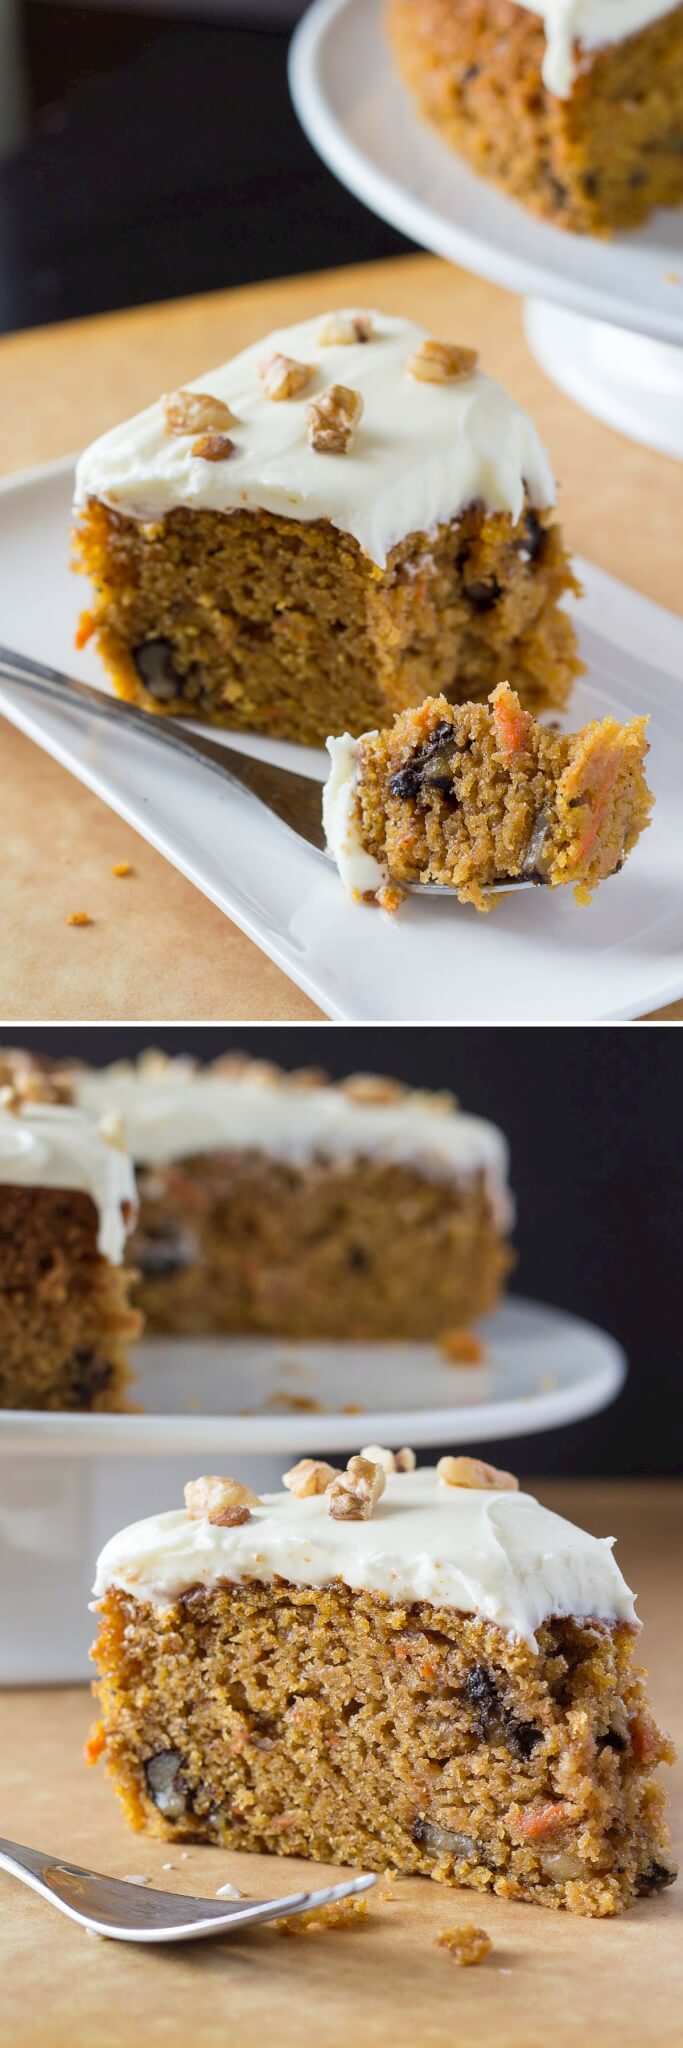 The BEST carrot cake I've ever had. So moist, filled with spices, slathered with smooth & tangy cream cheese frosting, and just plain delicious.